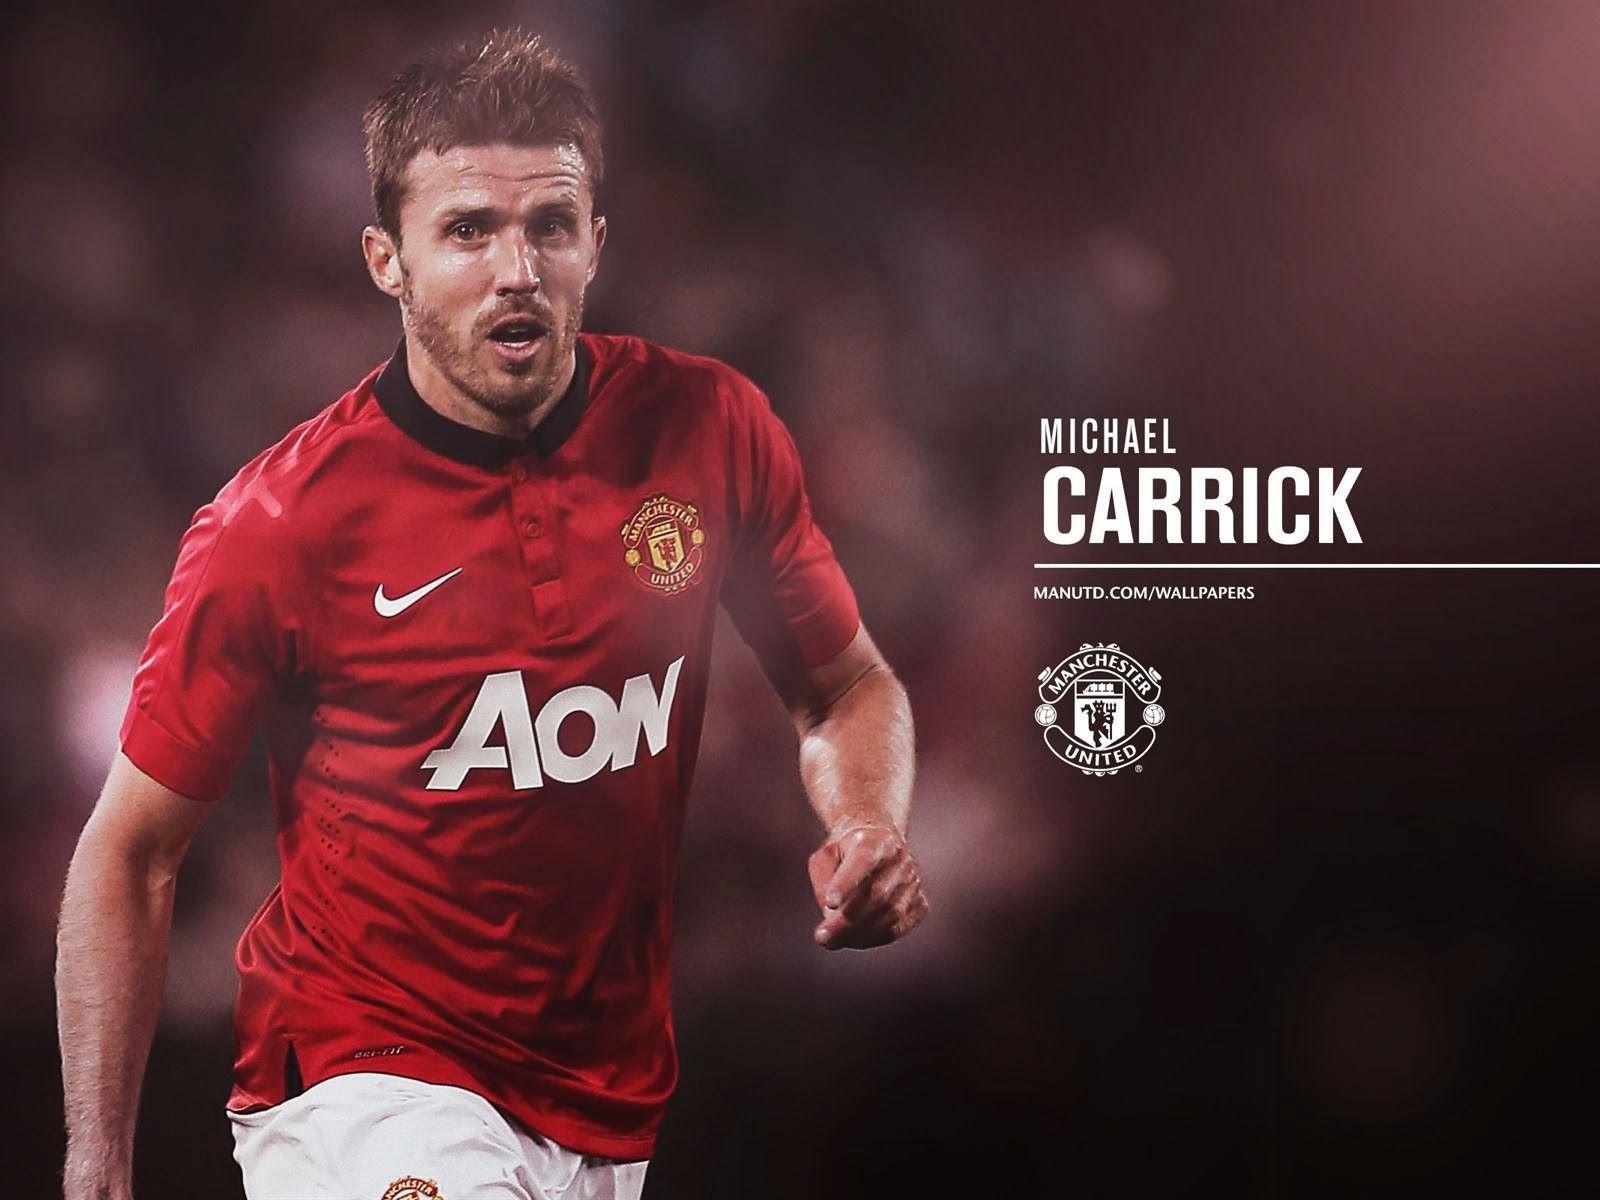 Official Sites of World Football Players: Michael Carrick official